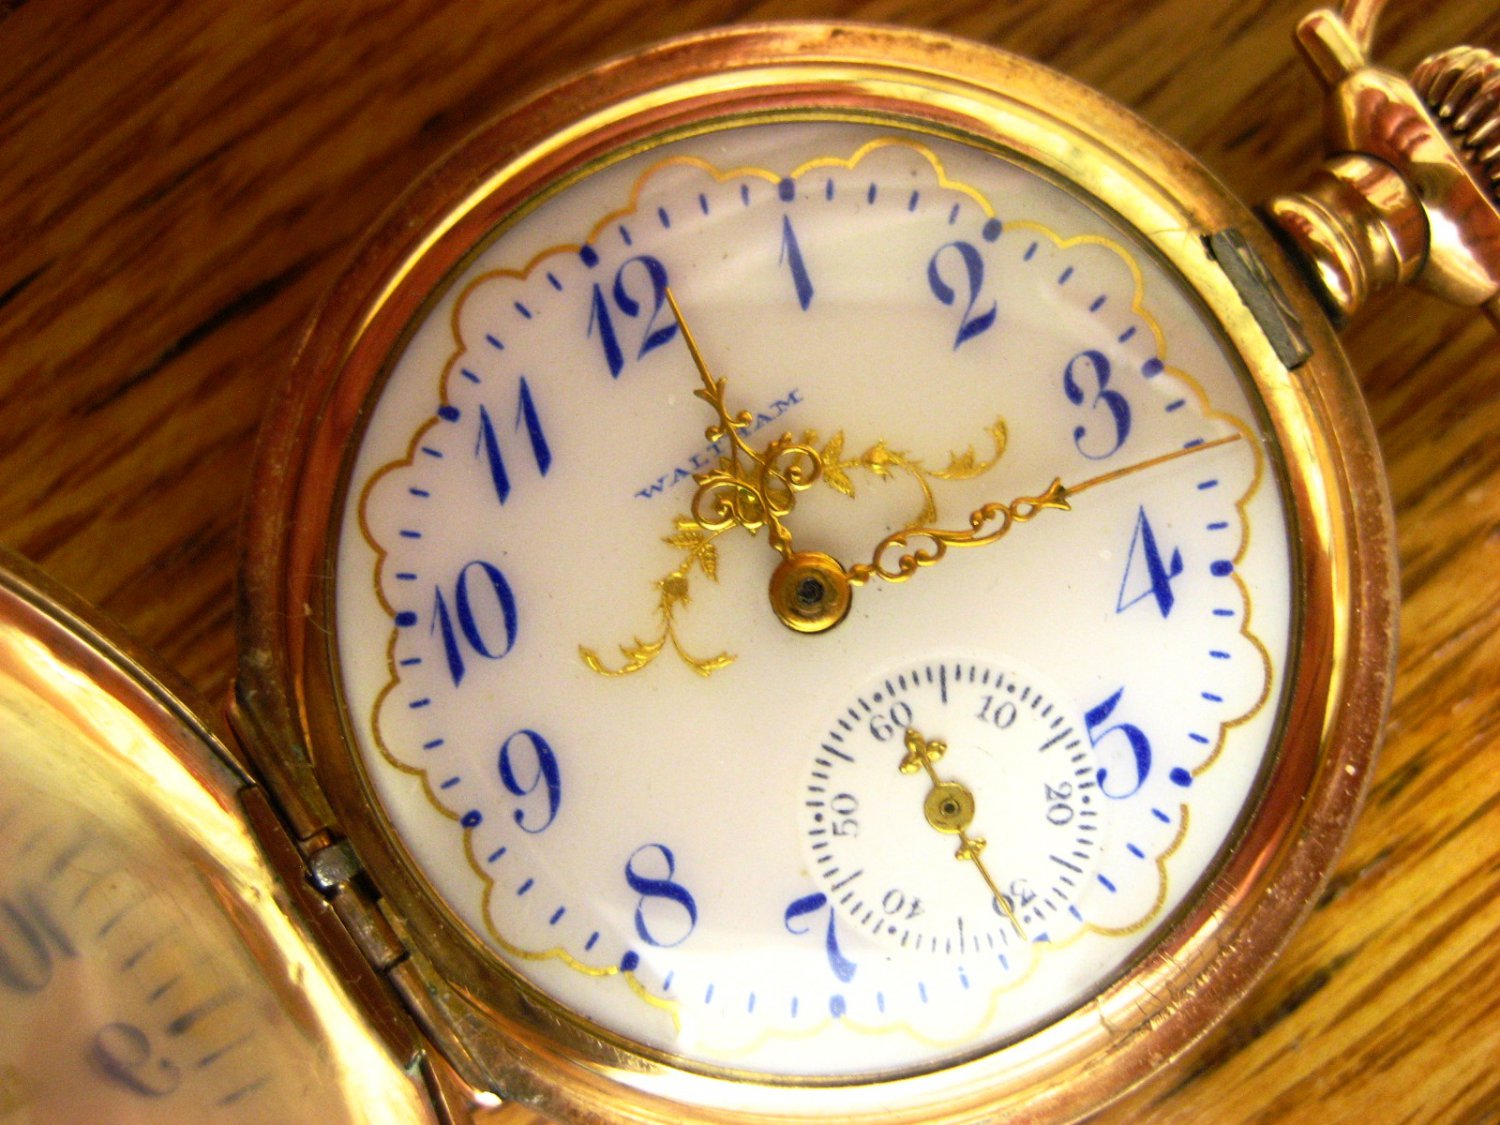 1908 waltham pocket watch value by serial number